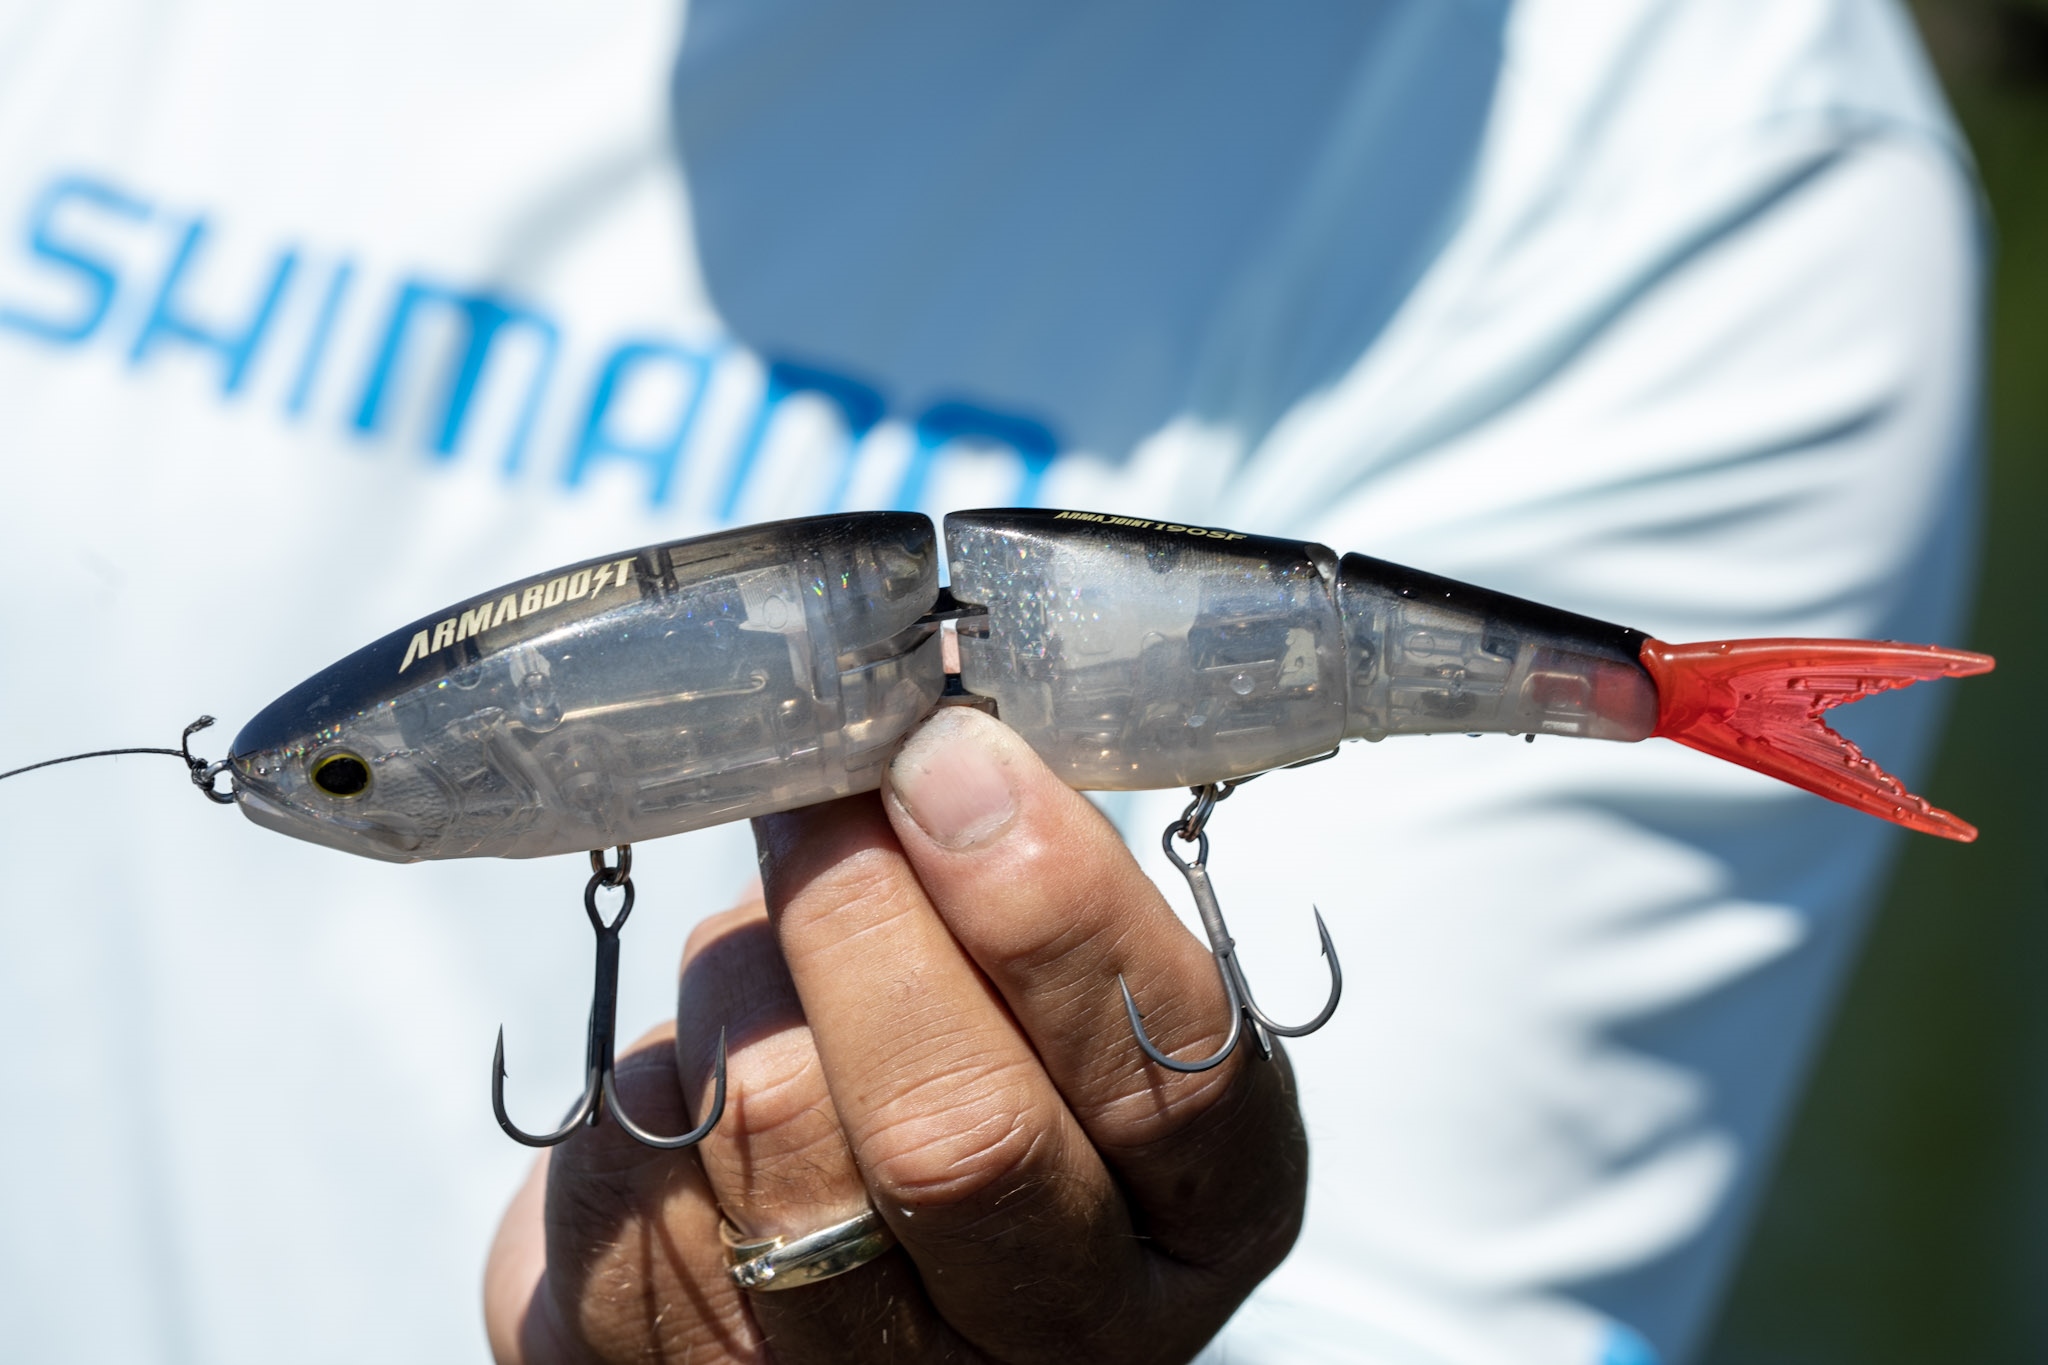 swimbaits bass fishing, swimbaits bass fishing Suppliers and Manufacturers  at